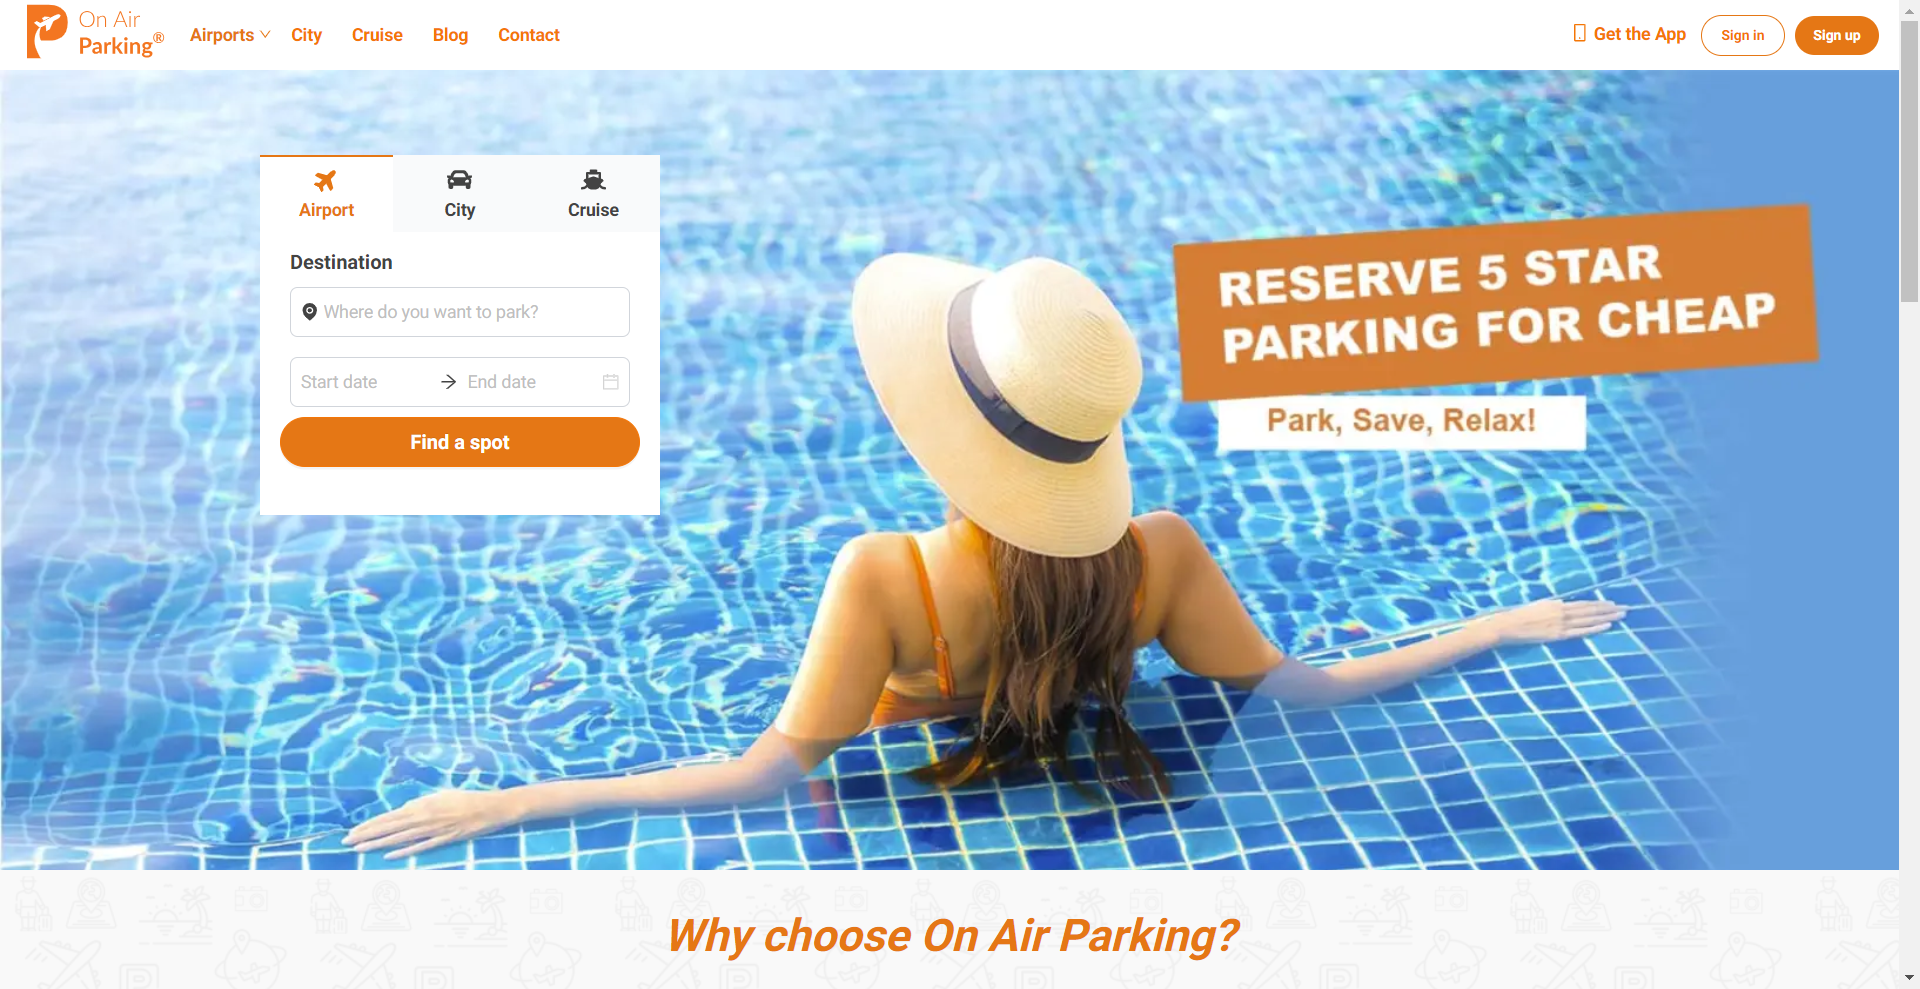 Slash Travel Costs with This Insane Airport Parking Deal - Starting at $3.75